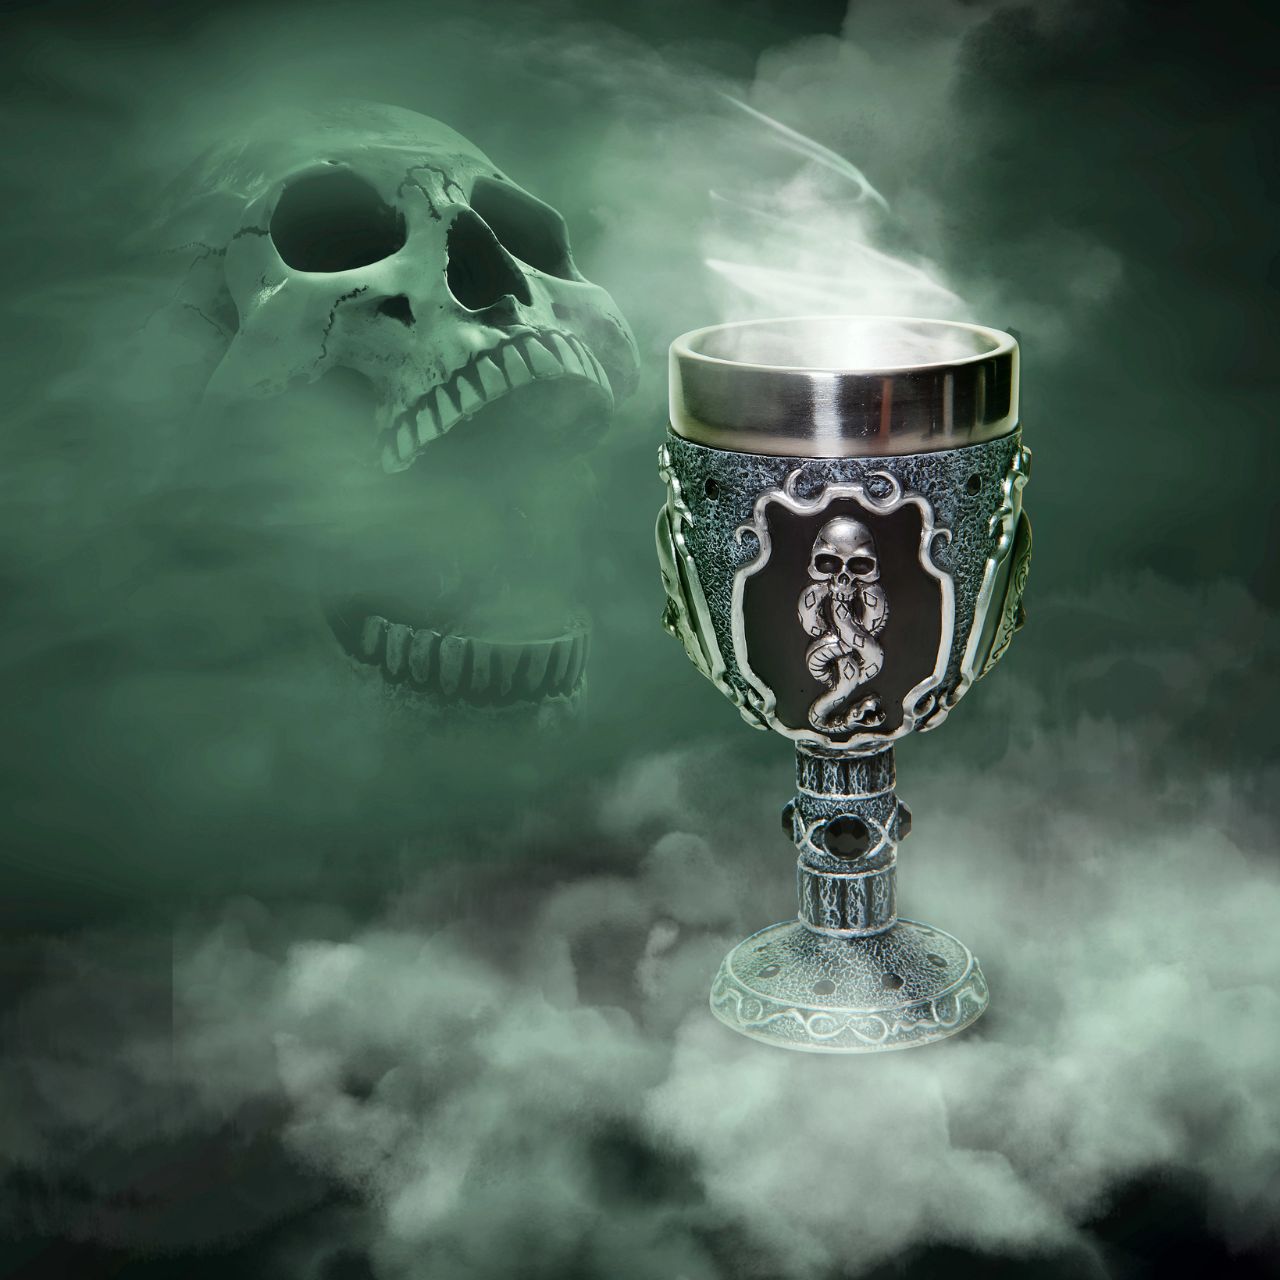 Wizarding World Harry Potter Dark Arts Decorative Goblet  This decorative goblet is adorned with the masks of those who practice the Dark Arts. Those that follow Lord Voldemort and create fear wherever they go.